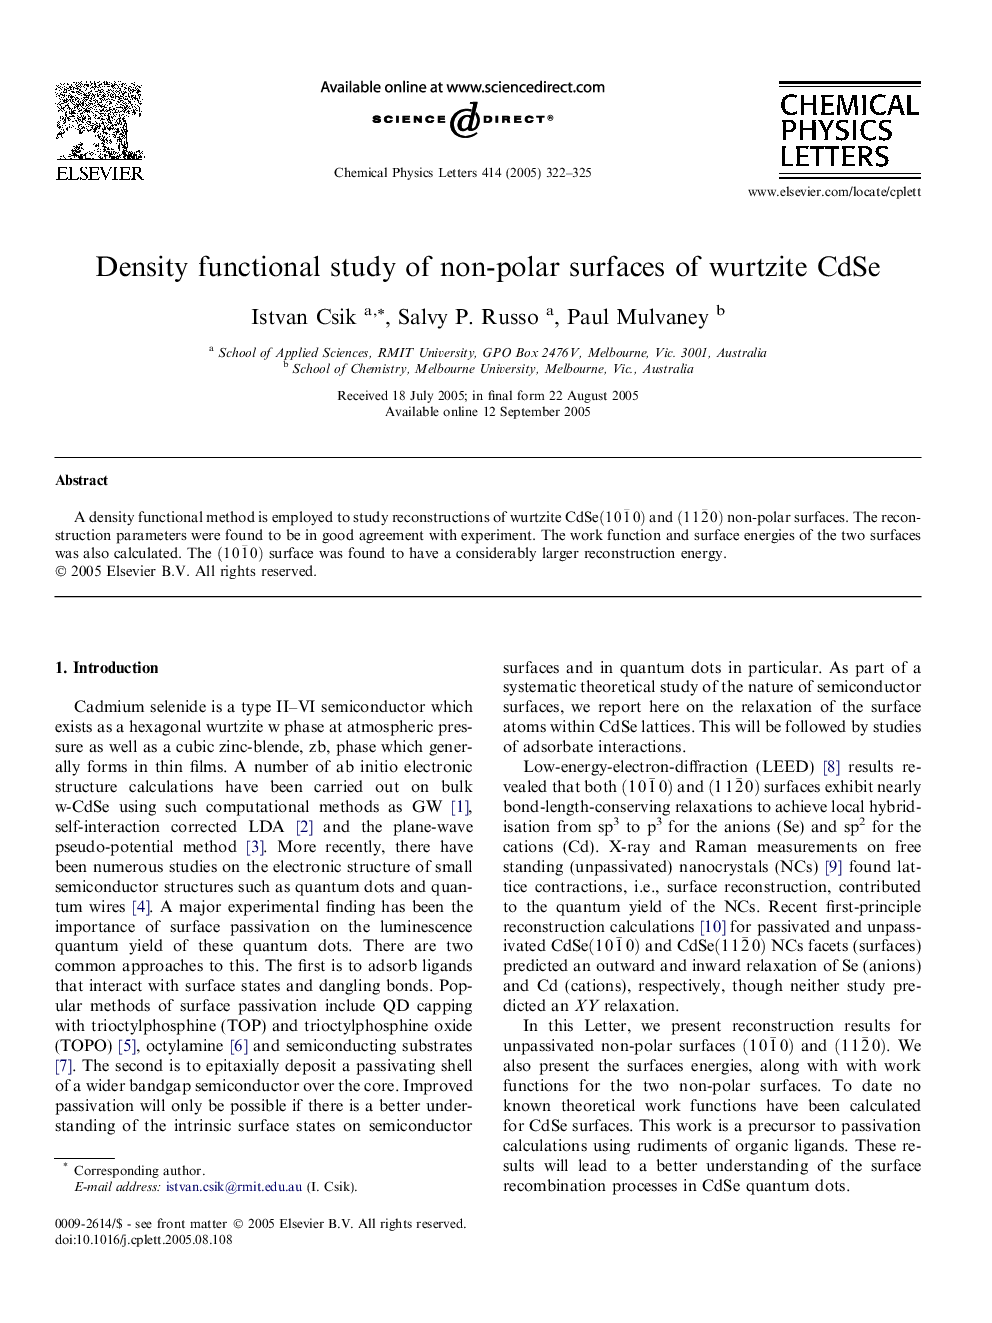 Density functional study of non-polar surfaces of wurtzite CdSe